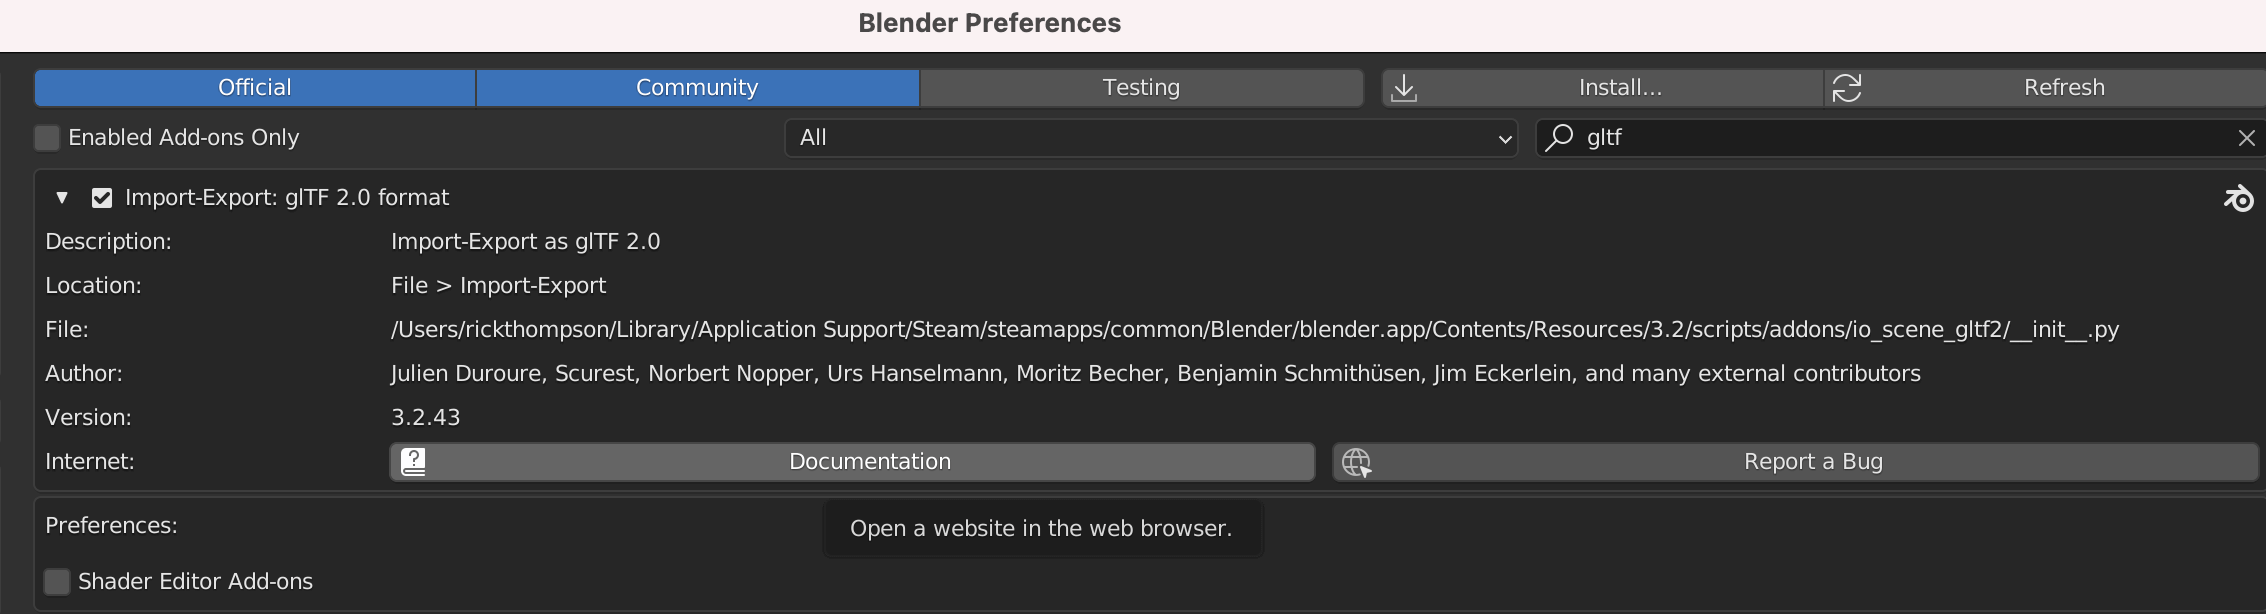 GTLF2 Exported in addons section of preferences in blender